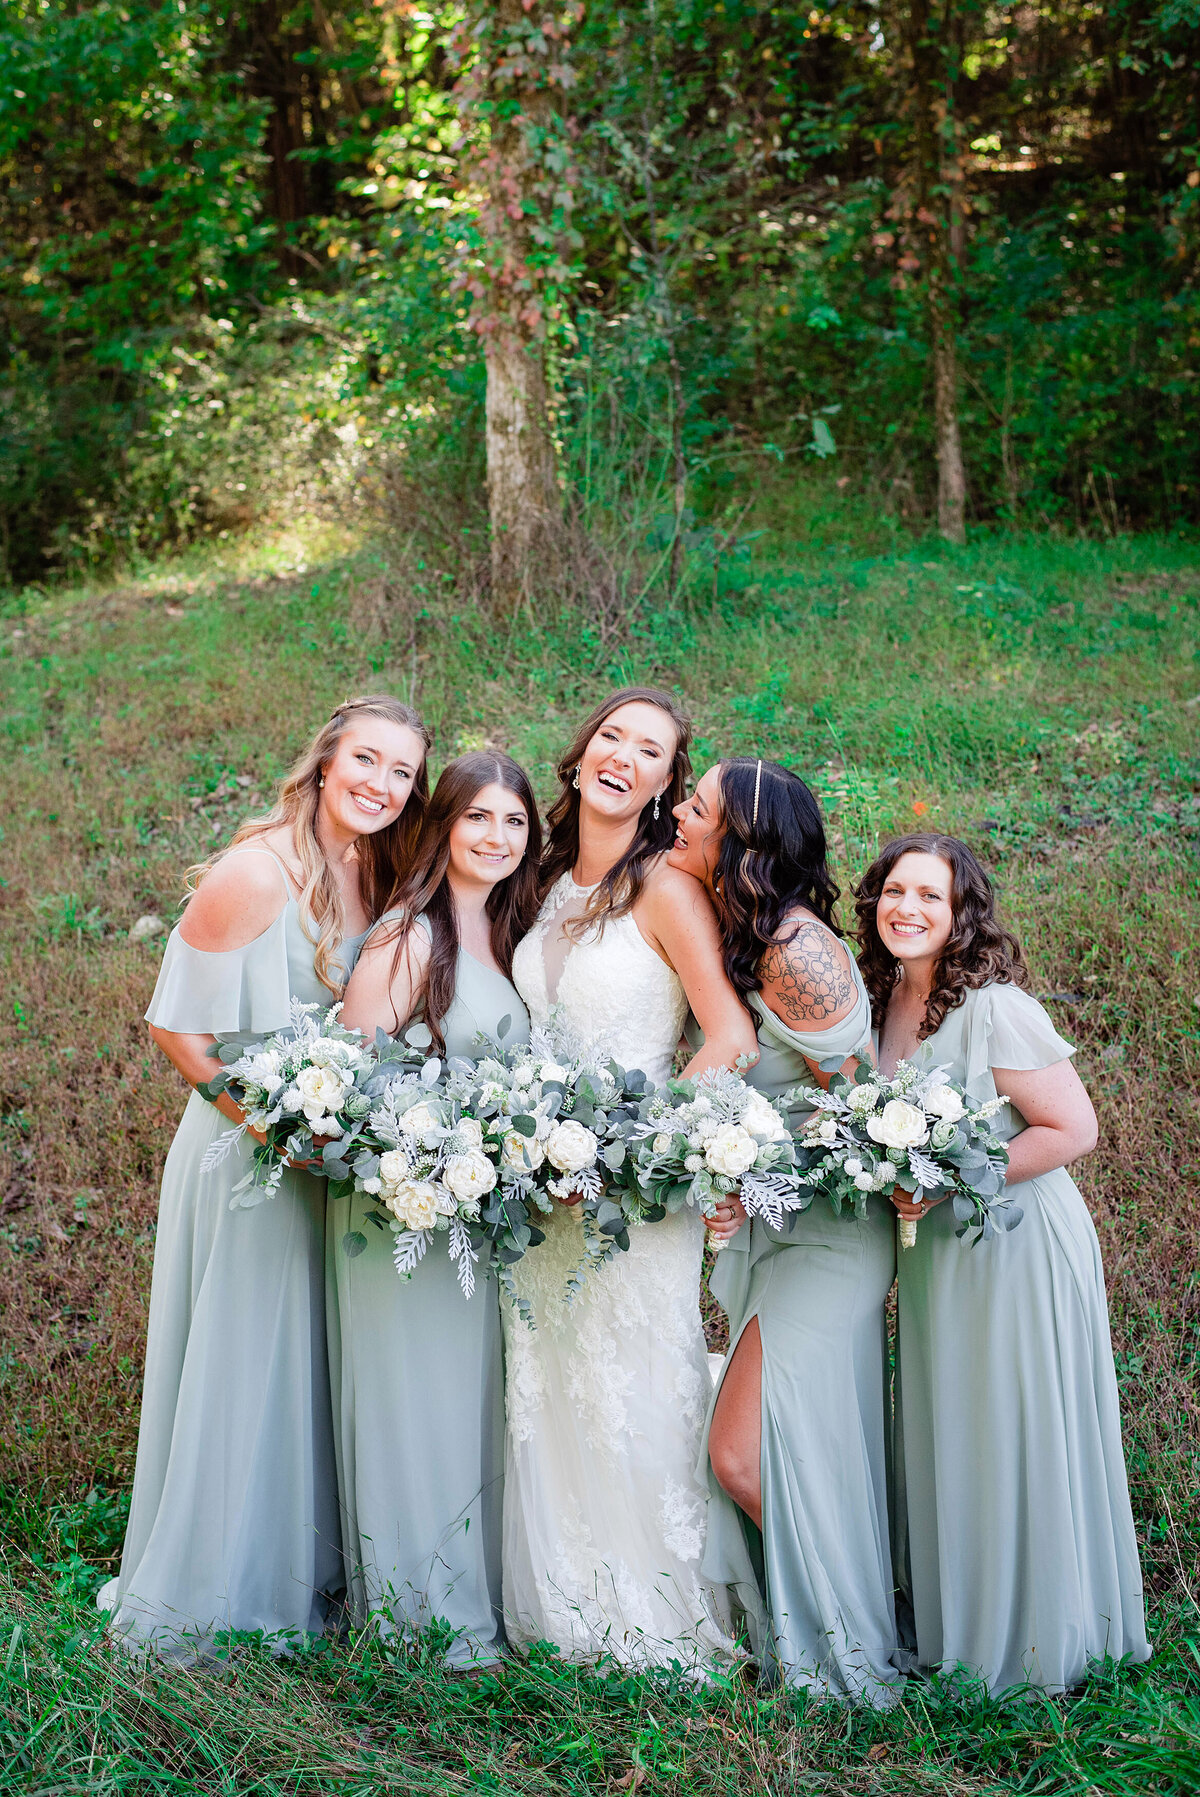 Bride surrounded by her bridesmaids laughing together, the girls are wearing a soft mint dress color